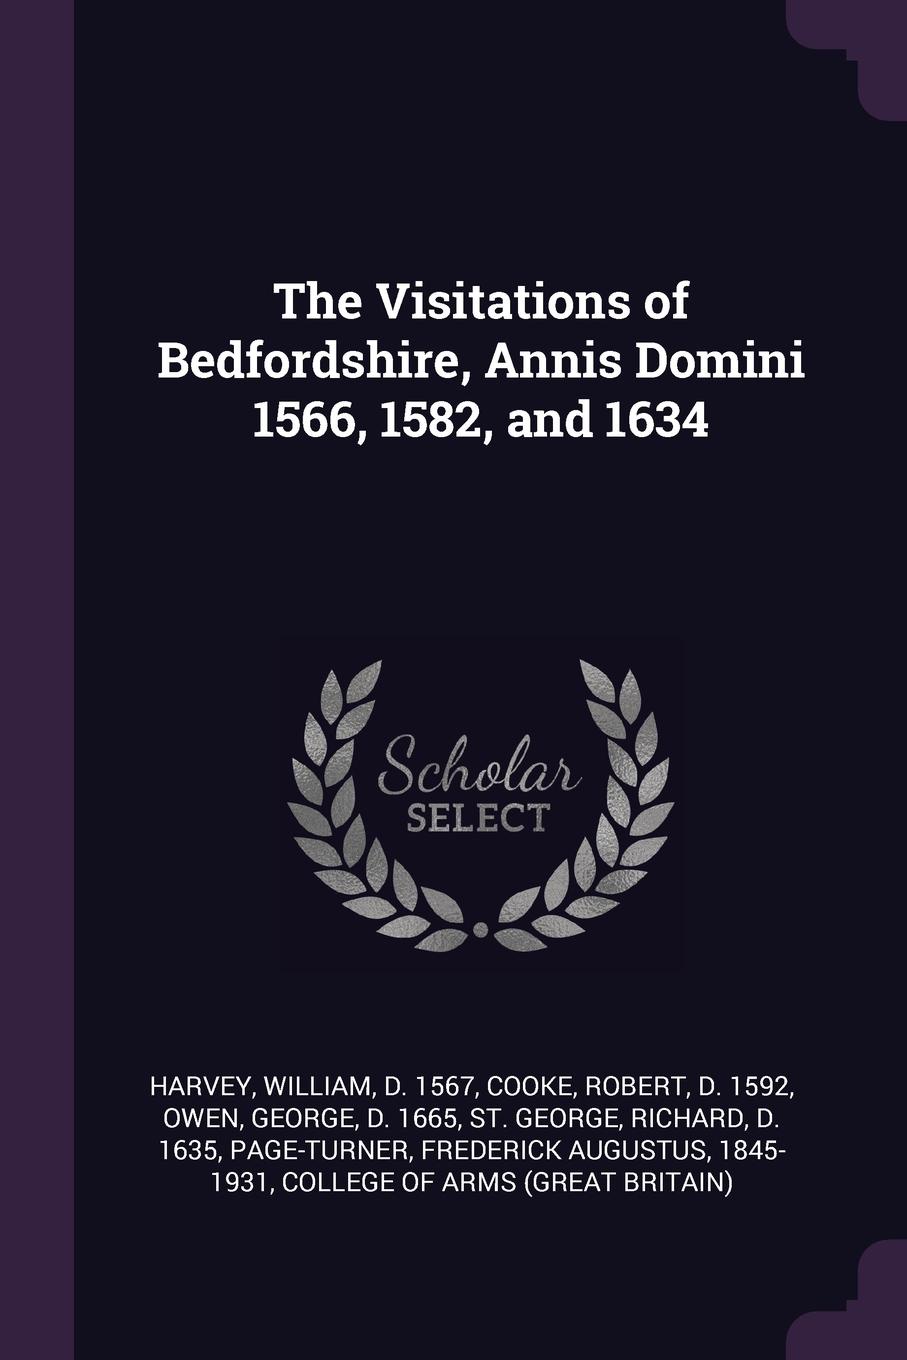 The Visitations of Bedfordshire, Annis Domini 1566, 1582, and 1634